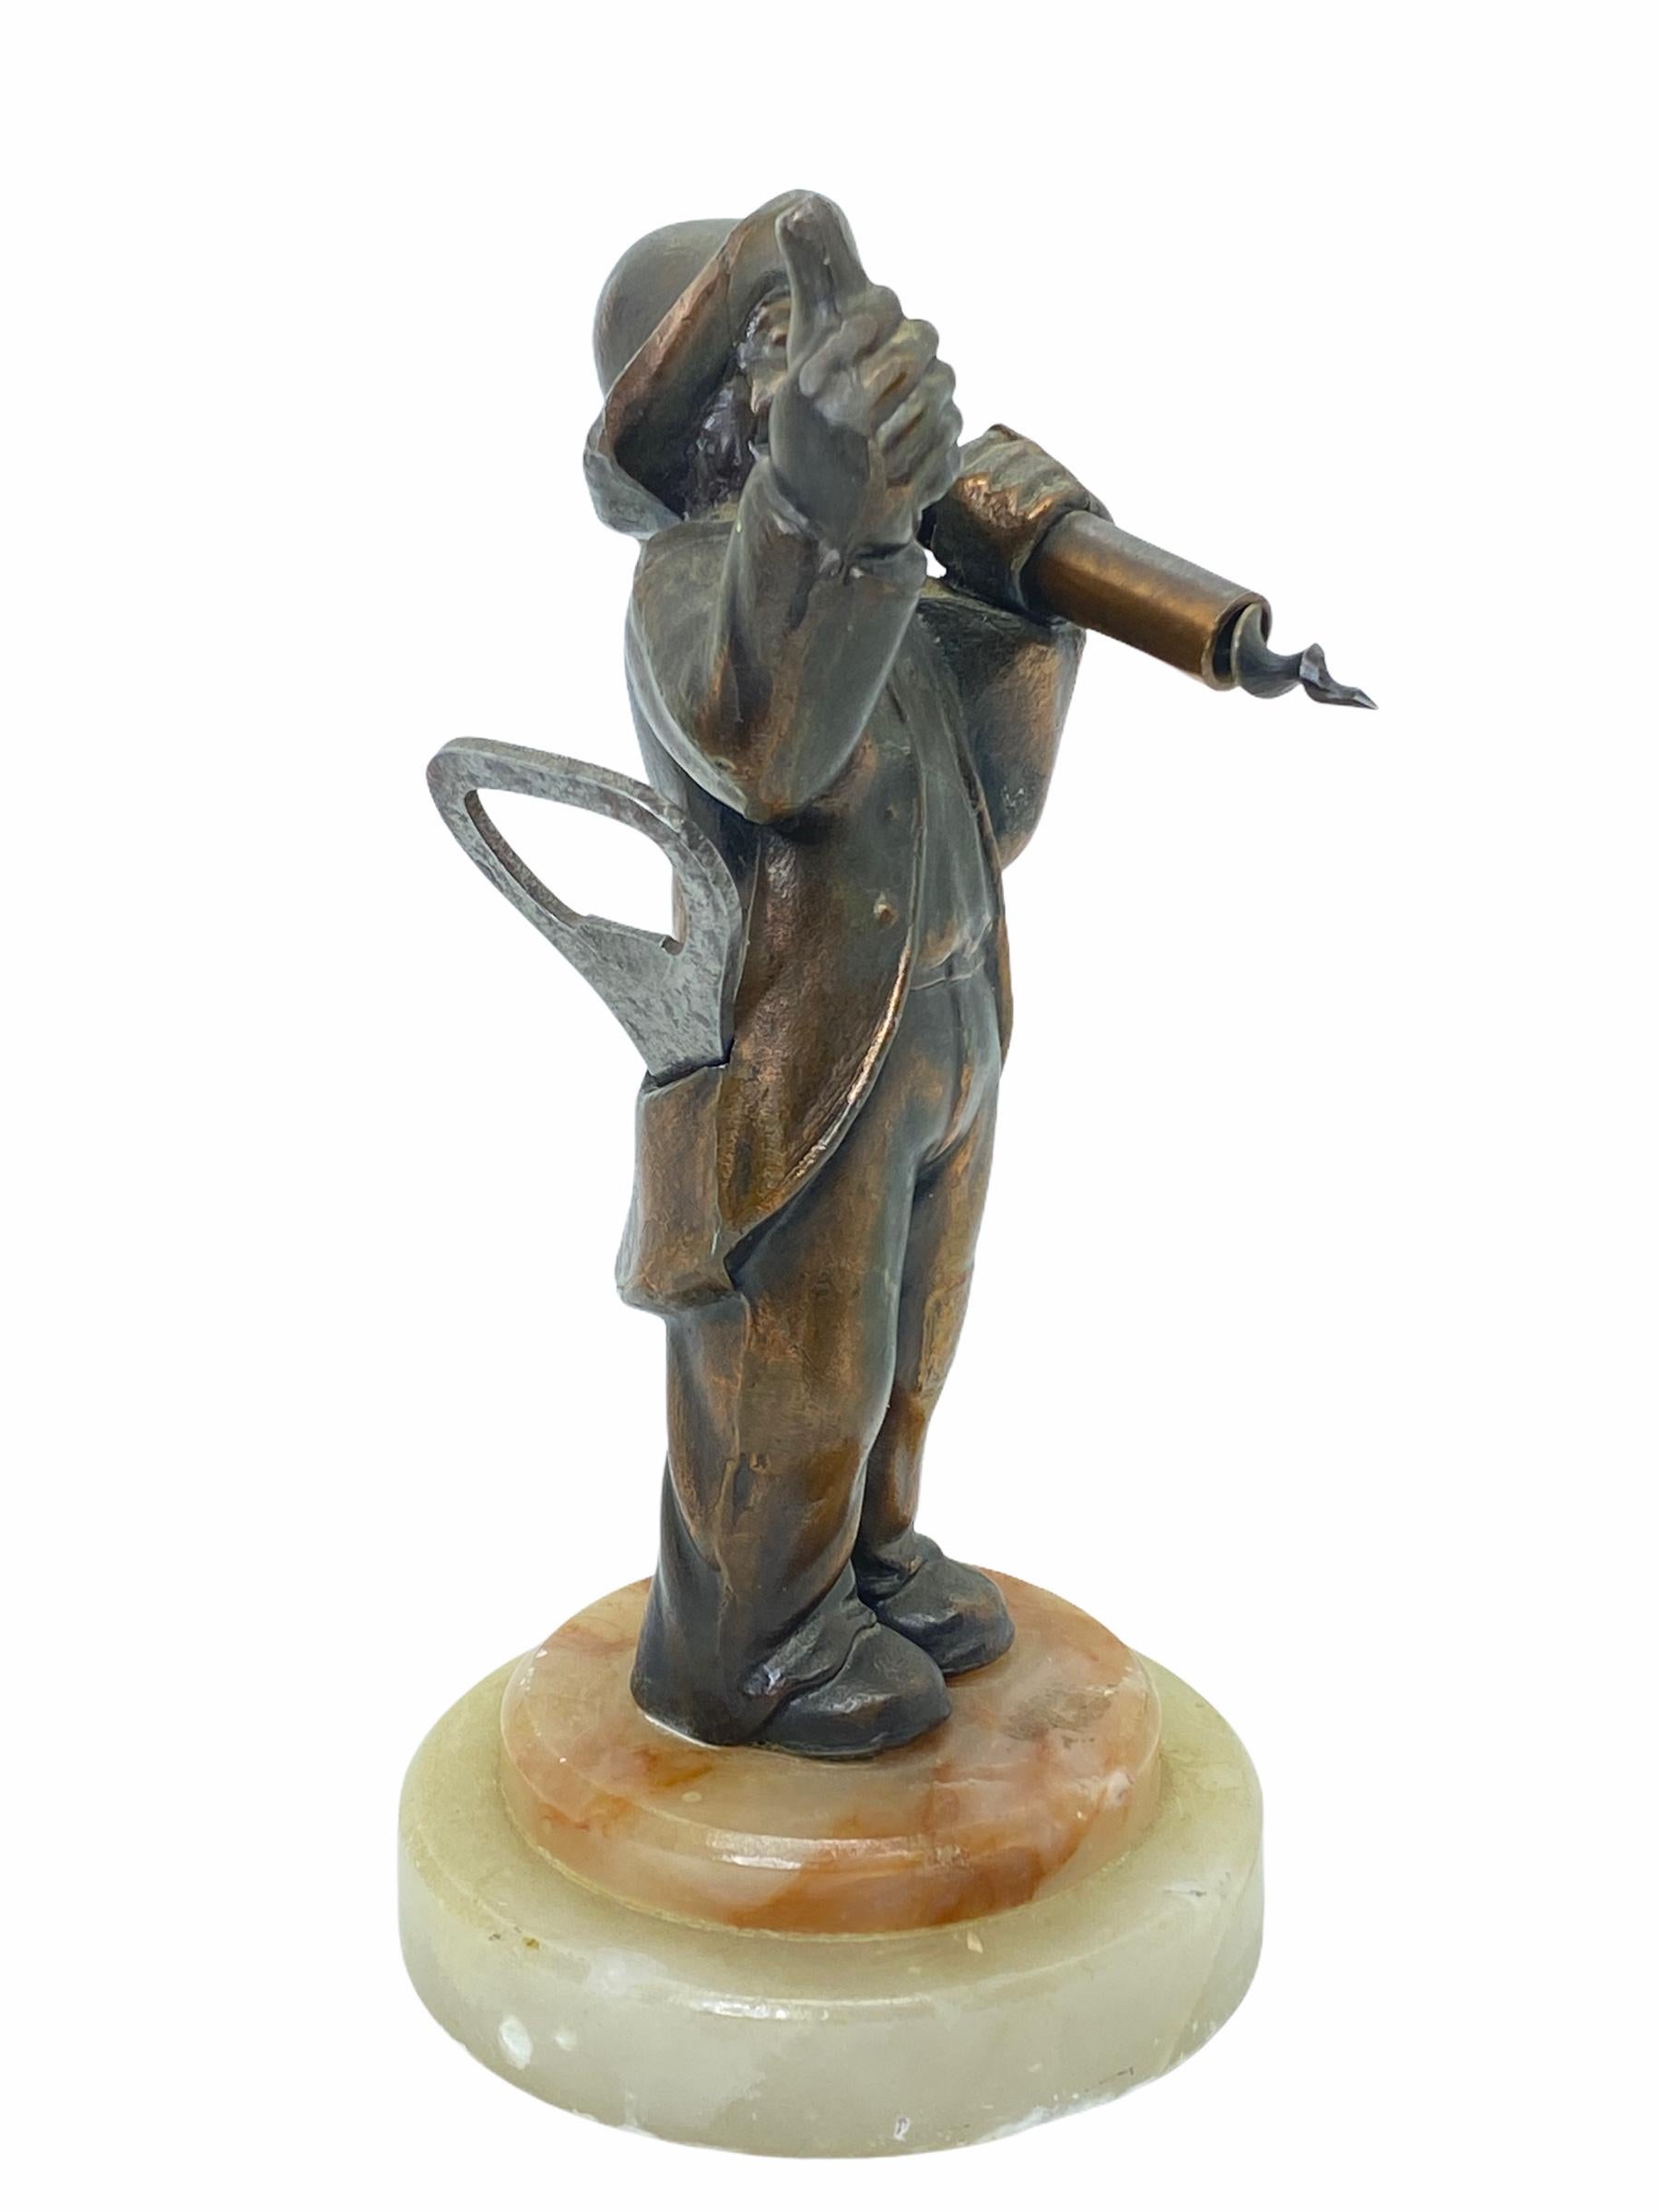 Classic early 1960s German Metal figurine on a marble base. Holding a corkscrew in the left hand and has a bottle opener in his pocket. Nice addition to your room or just for your collection of Barware. Found at an estate sale in Vienna, Austria.